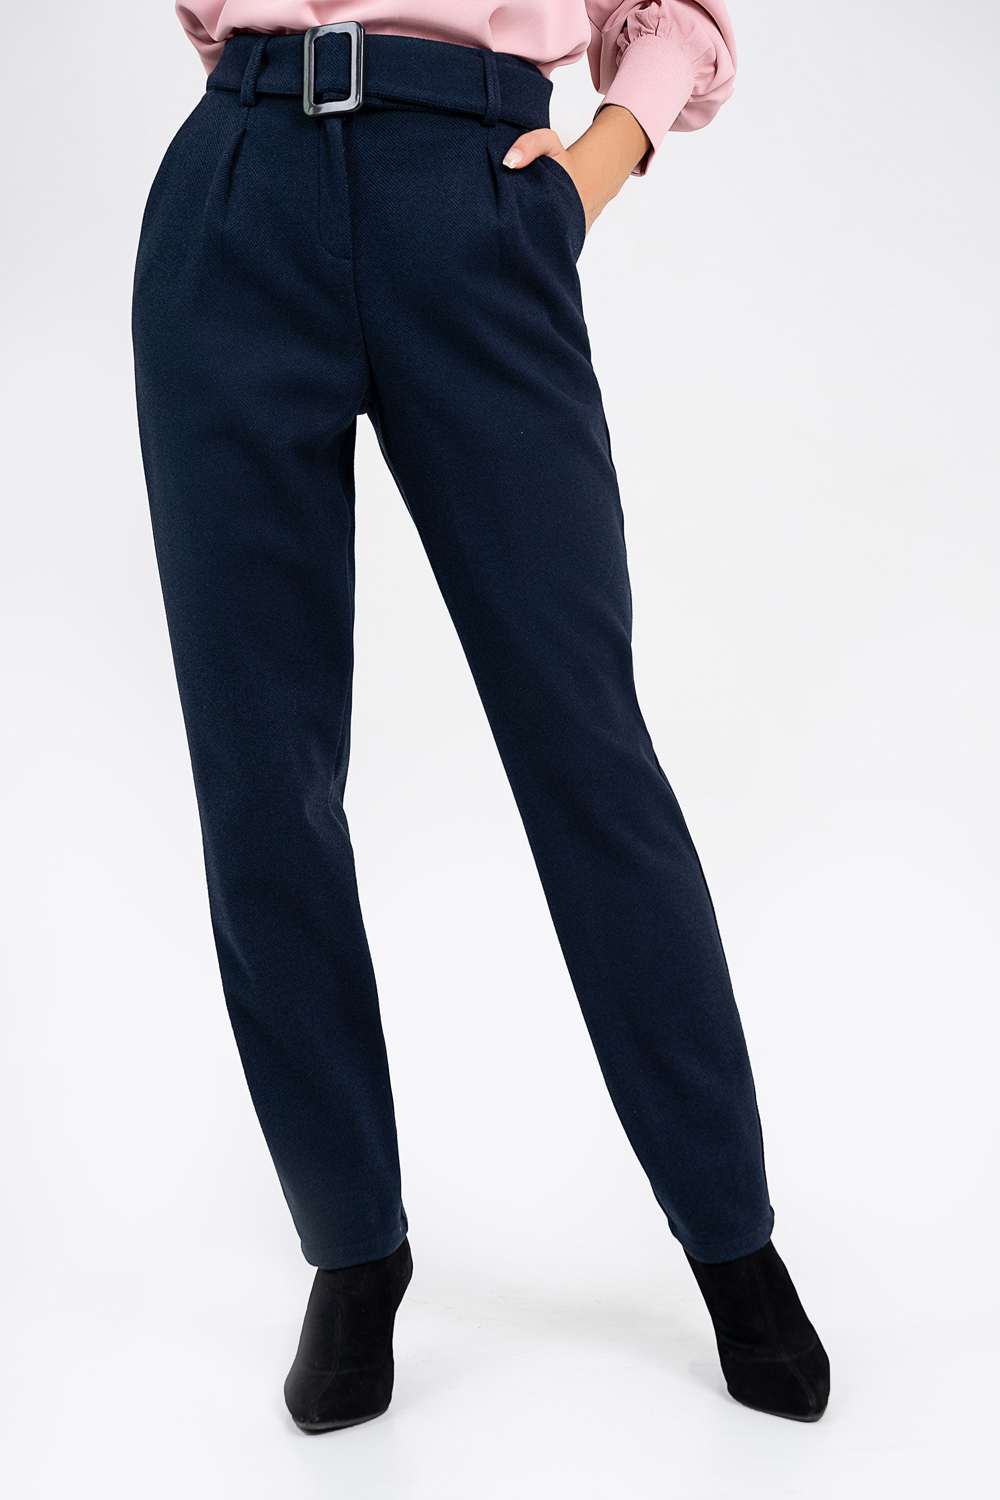 Warm trousers with belt and pockets